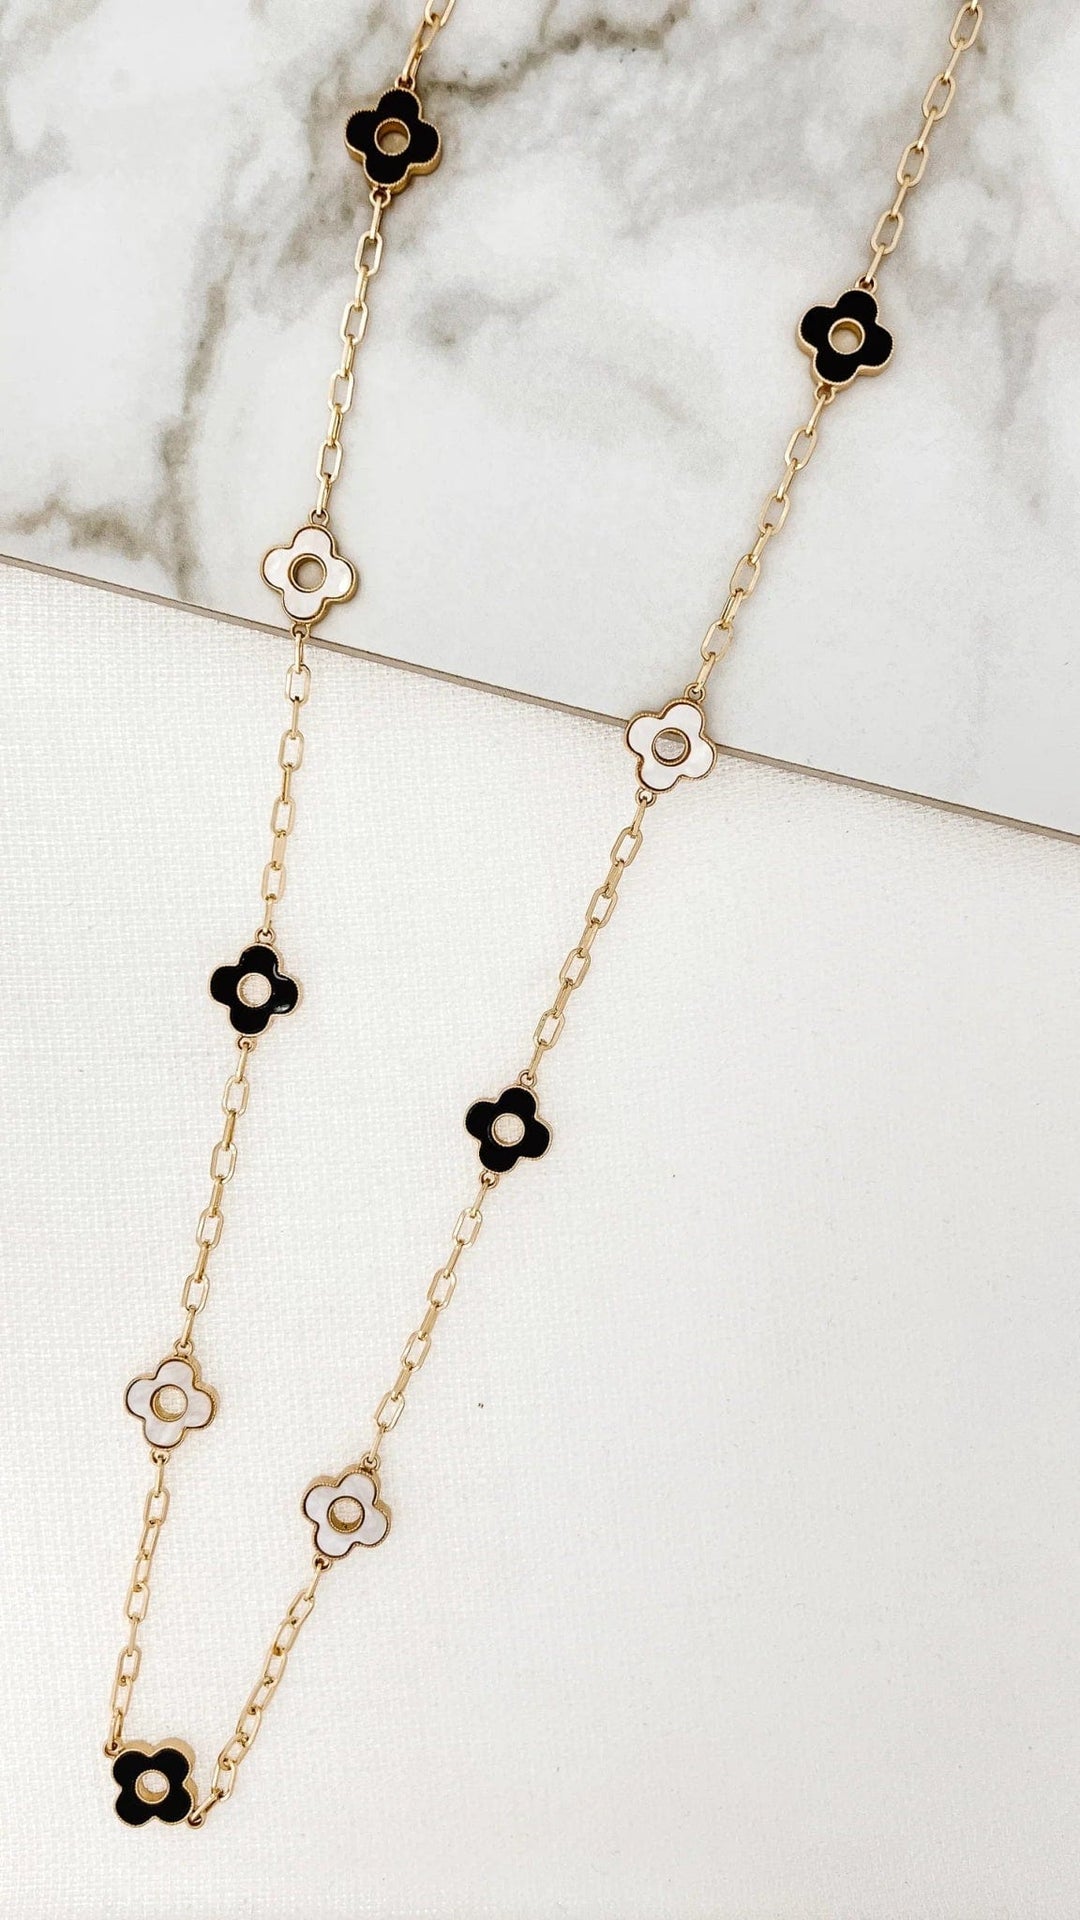 Envy black & white Fleurs Long Necklace In Gold - Crabtree Cottage